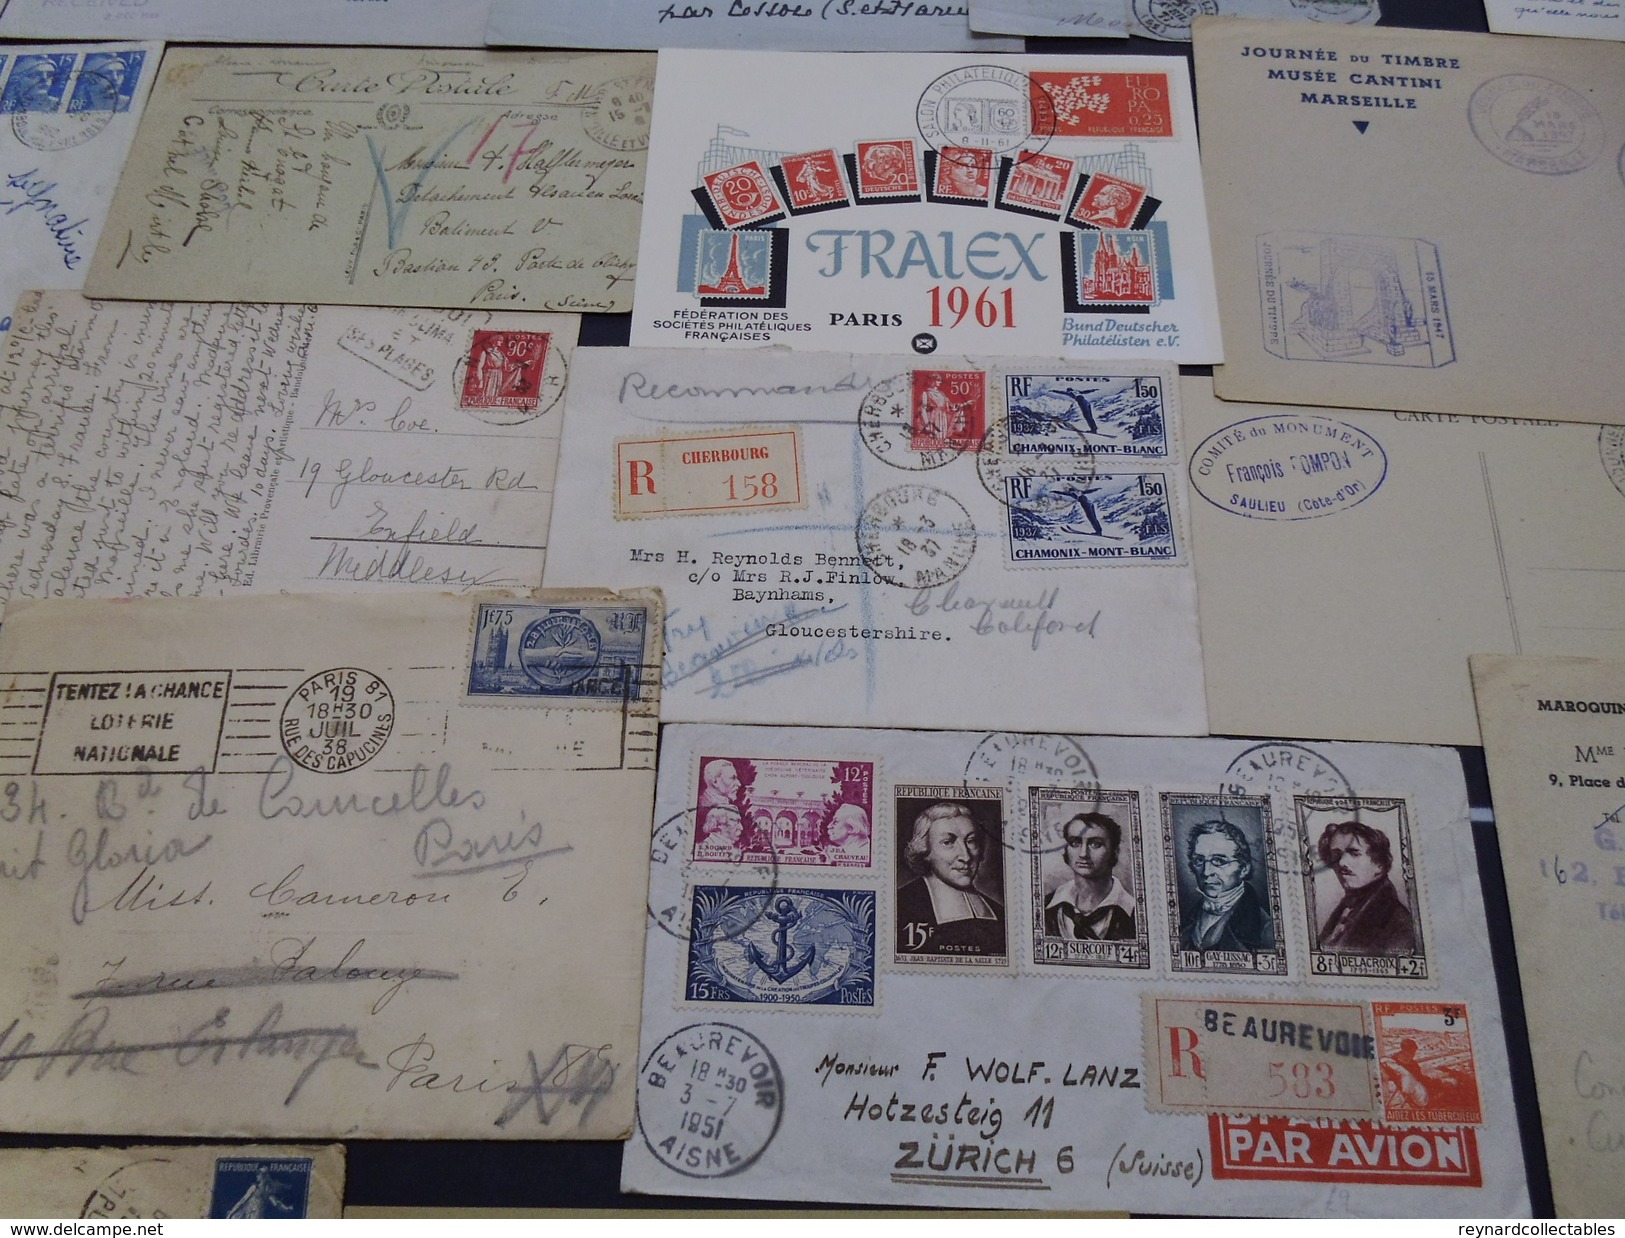 France very fine Postal History collection (290+ items). Pre-stamp, Classics, early fdcs,meter marks,Foire+++